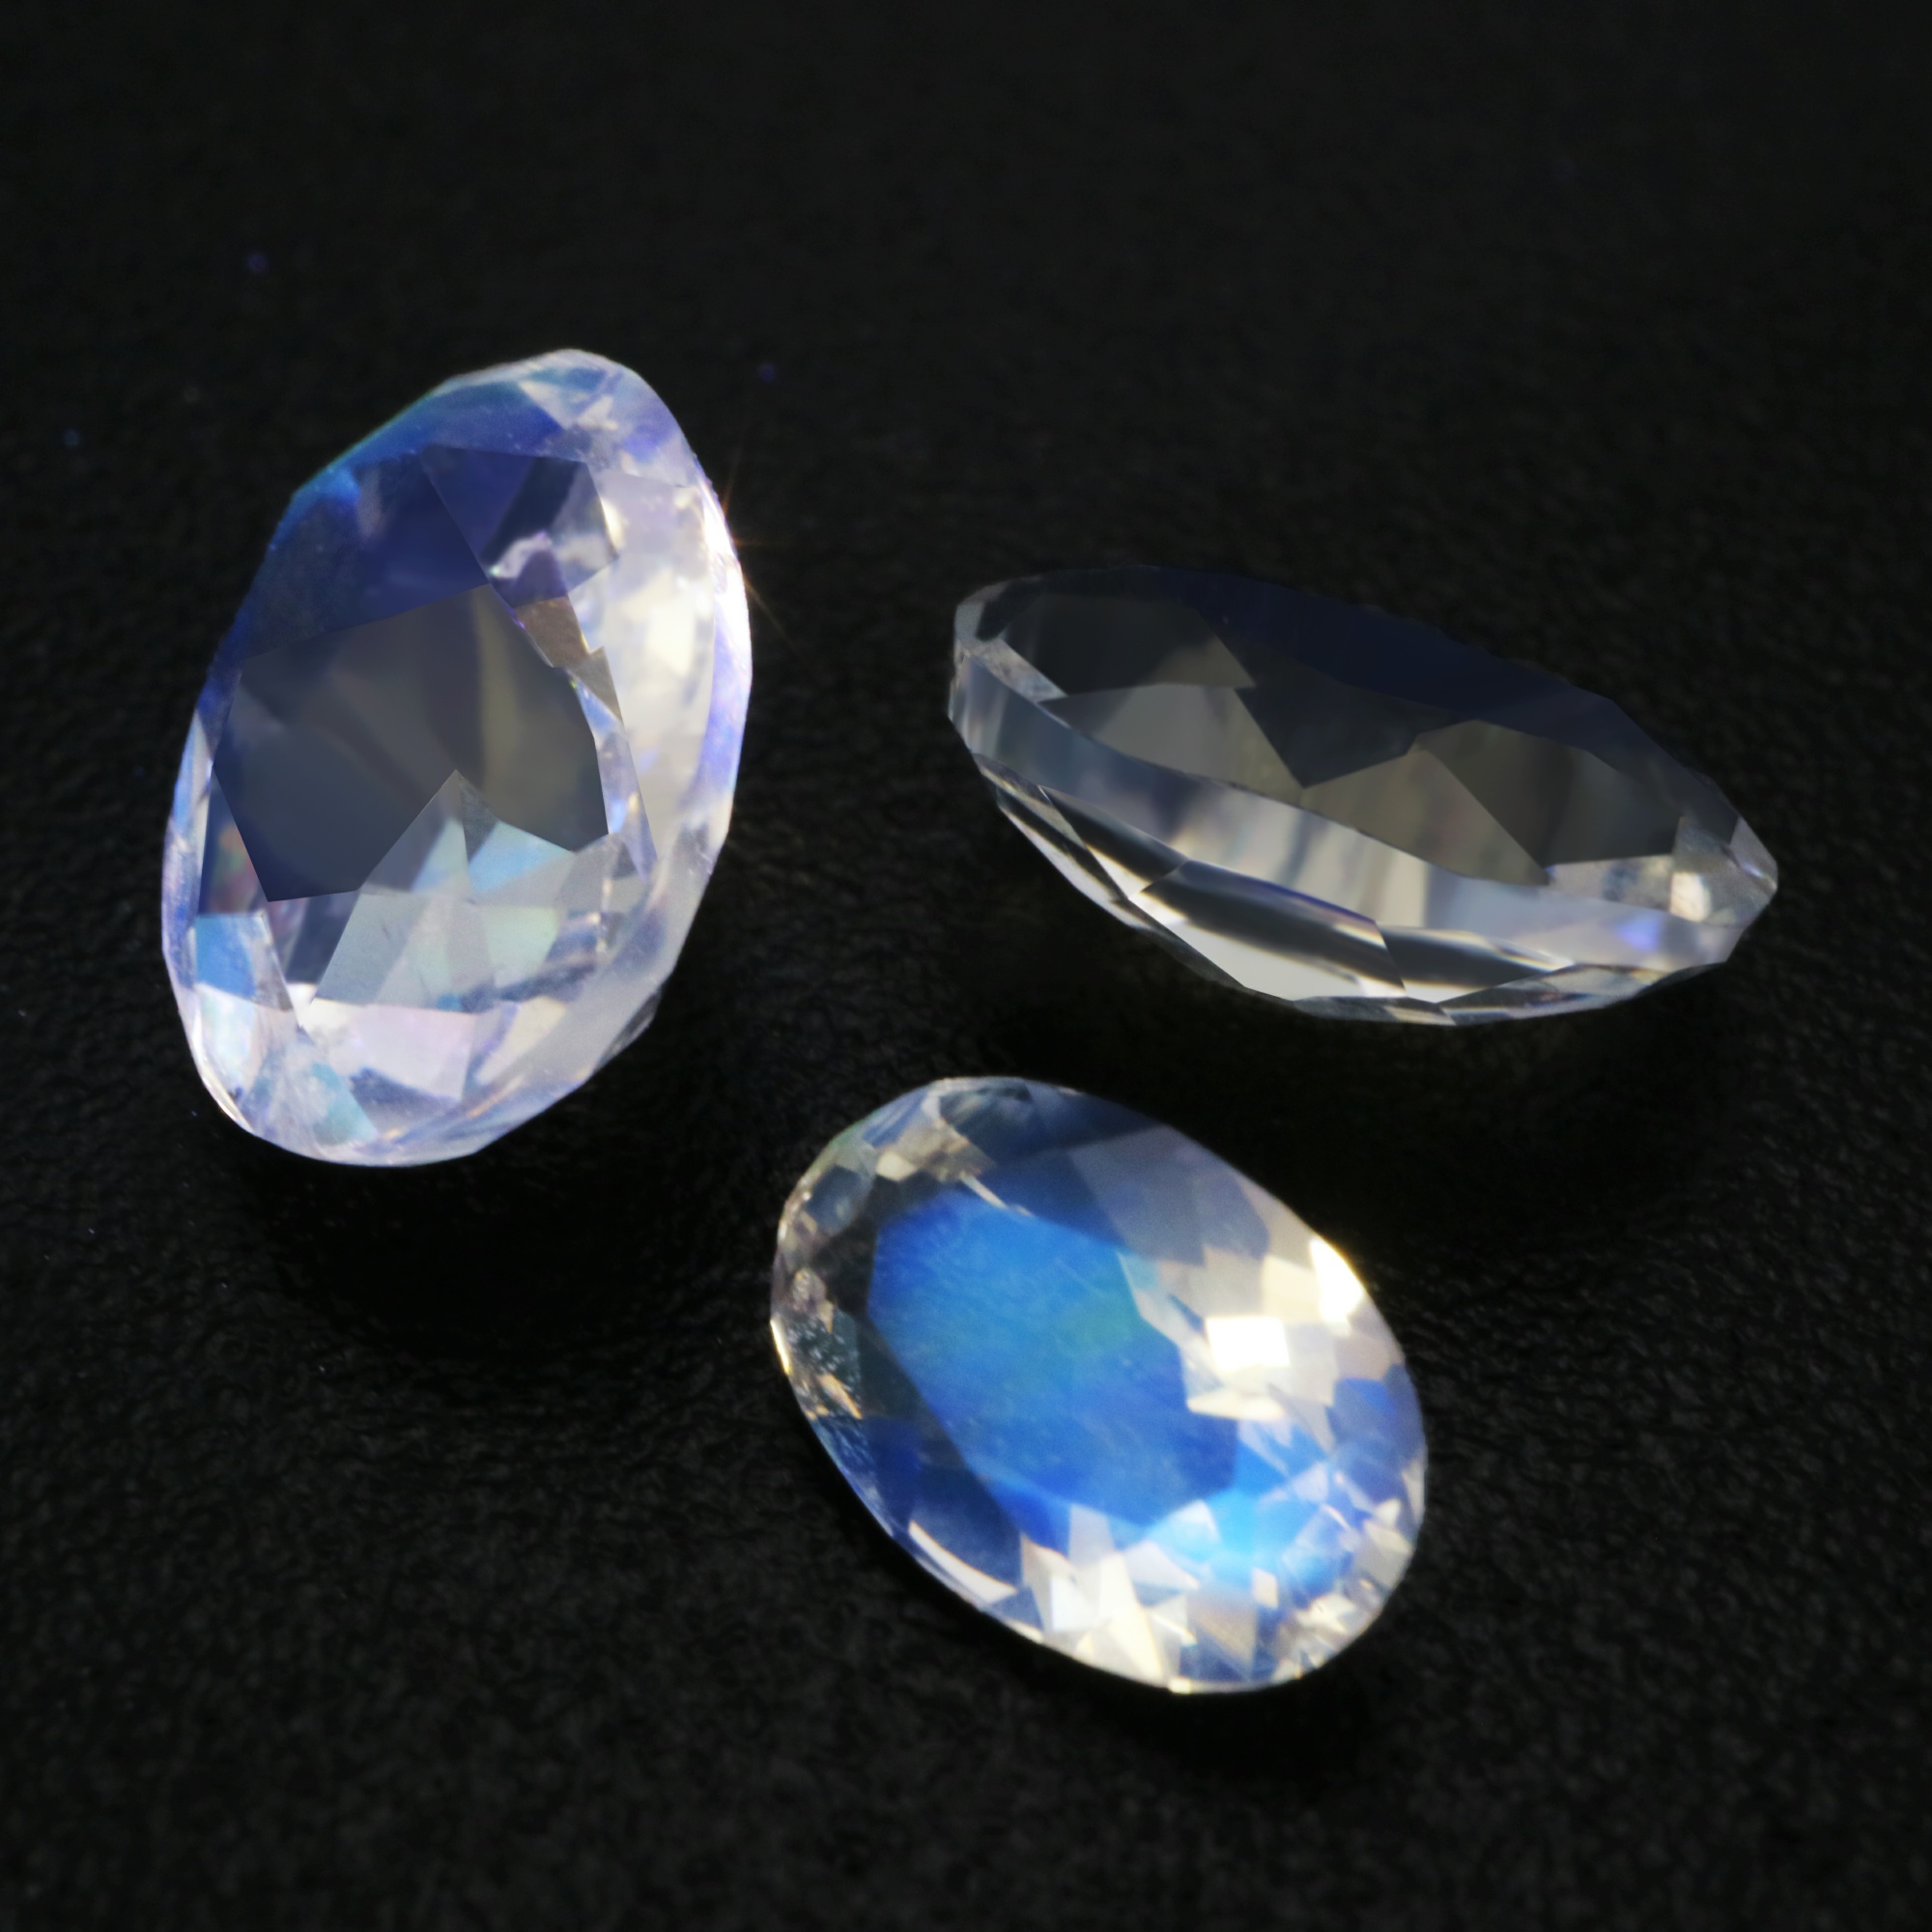 1Pcs Oval Blue Moonstone June Birthstone Faceted Cut AAA Grade Loose Gemstone Natural Semi Precious Stone DIY Jewelry Supplies 4120134 - Click Image to Close